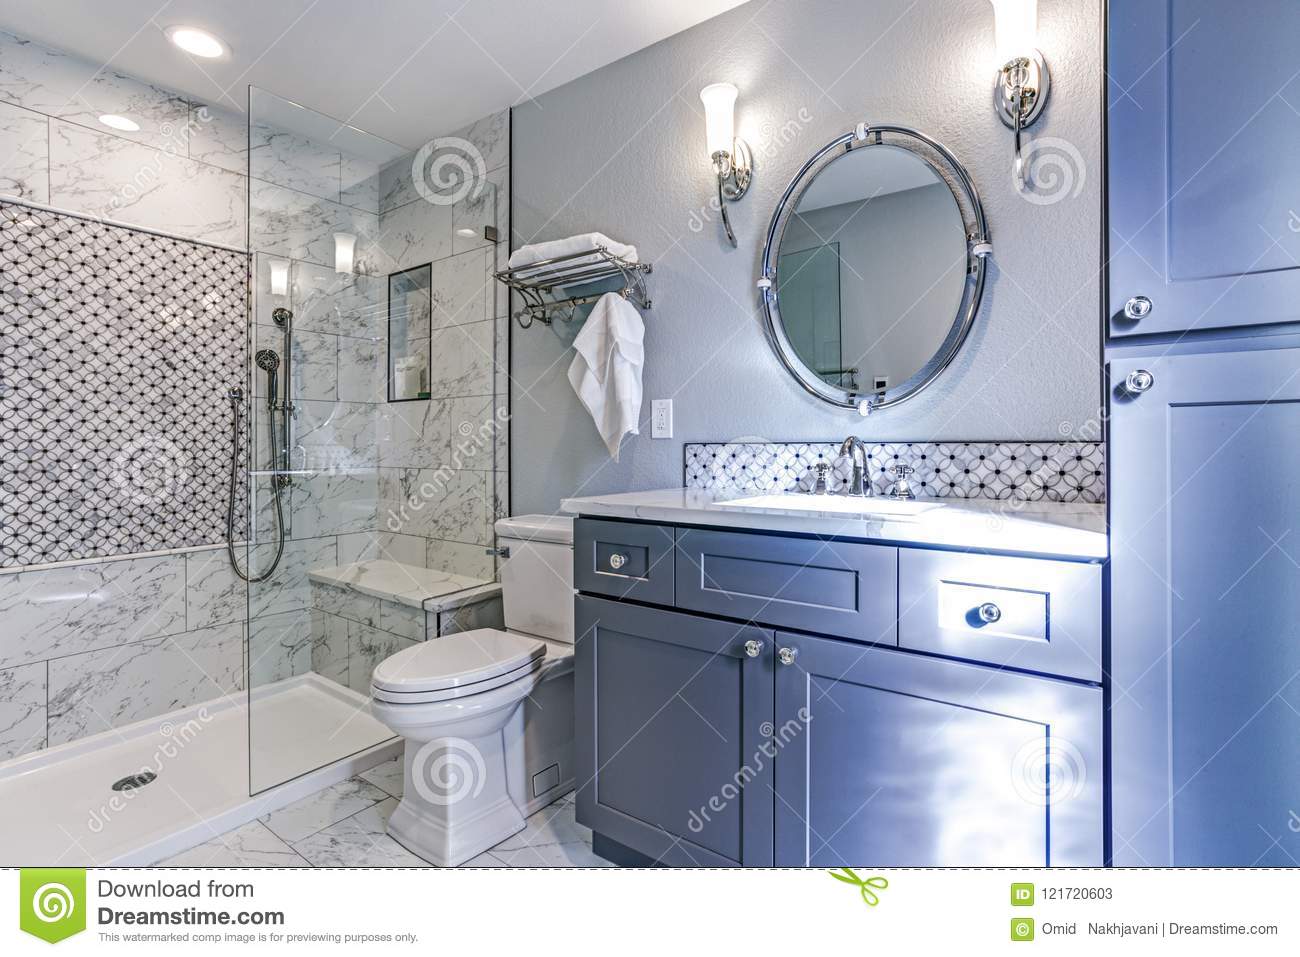 Tips to Know About Bathroom Renovation